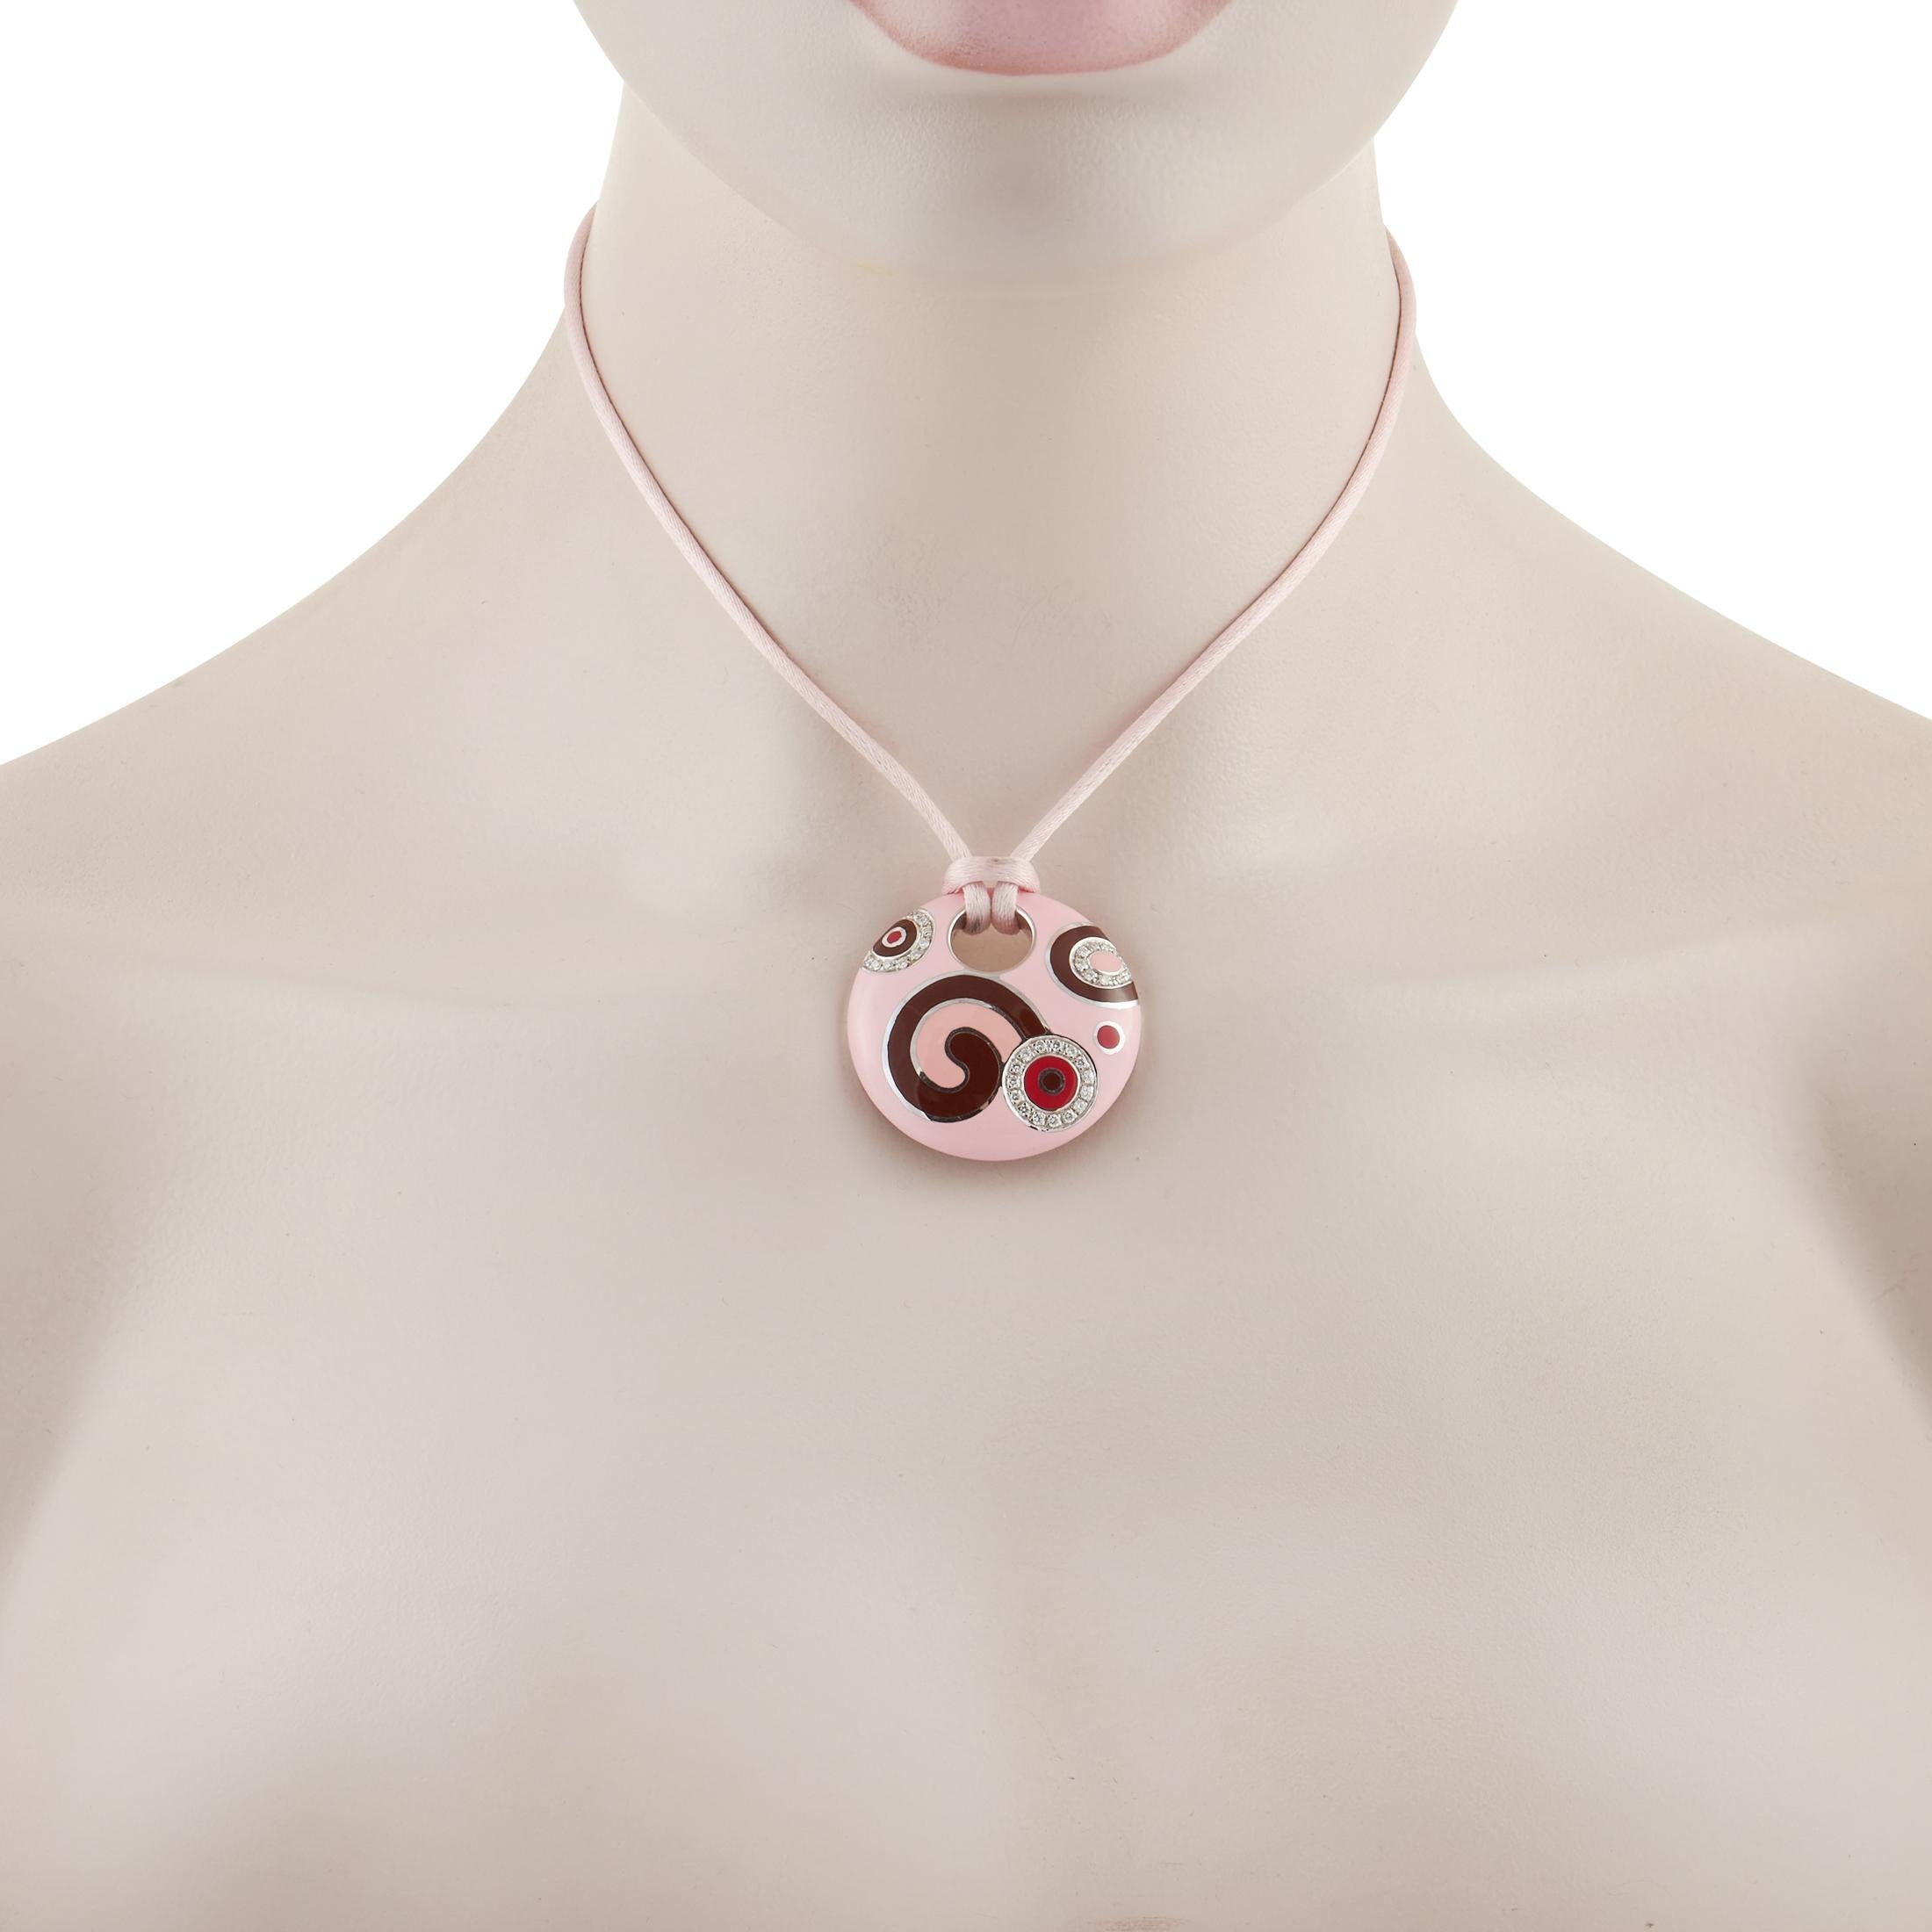 This creative pendant necklace from Roberto Coin has a decidedly artistic point of view. The round pendant measures 1.5” round and comes to life thanks to colorful enamel, sparkling diamonds, and 18K White Gold accents. It’s attached to a pink cord